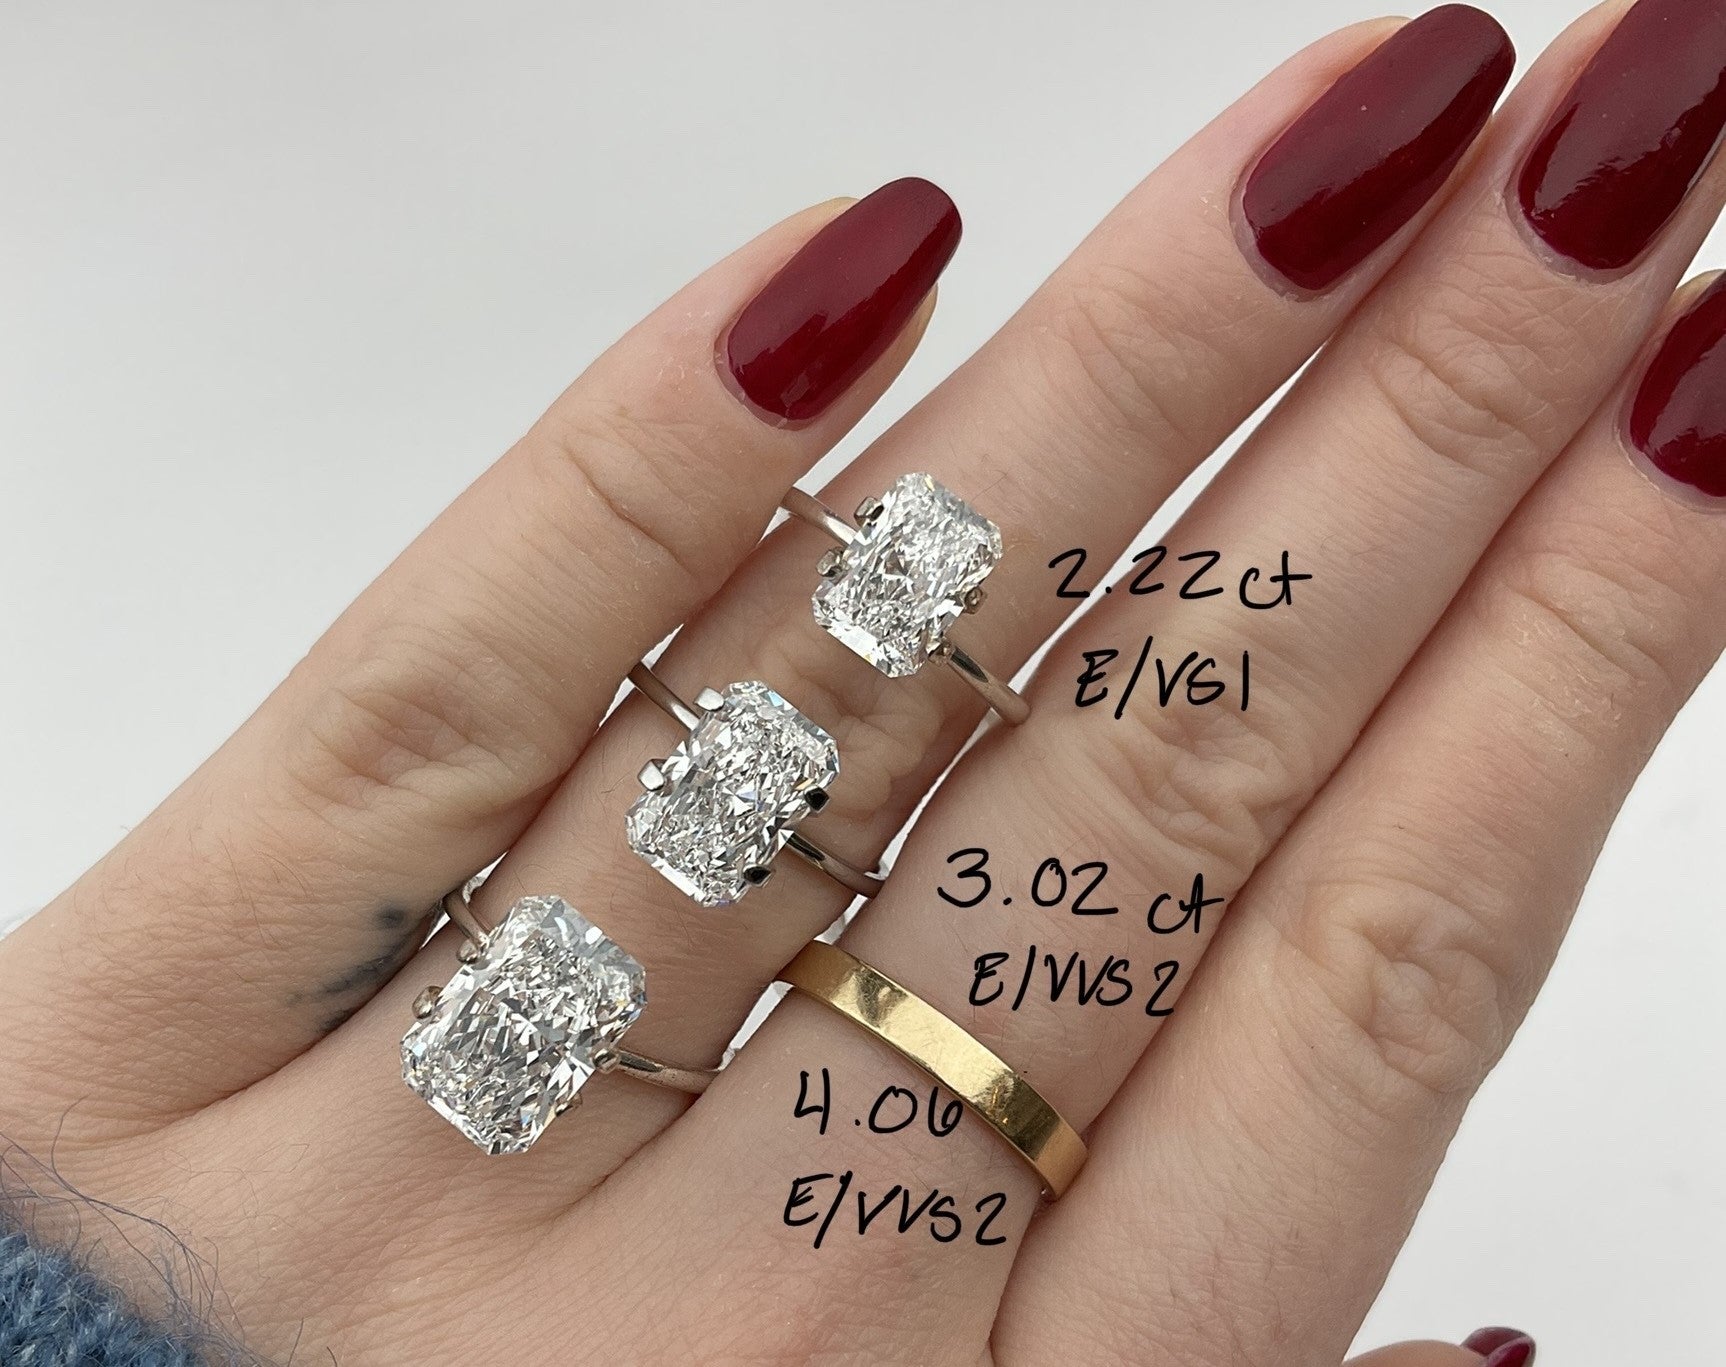 What is a Good Size Diamond for an Engagement Ring?